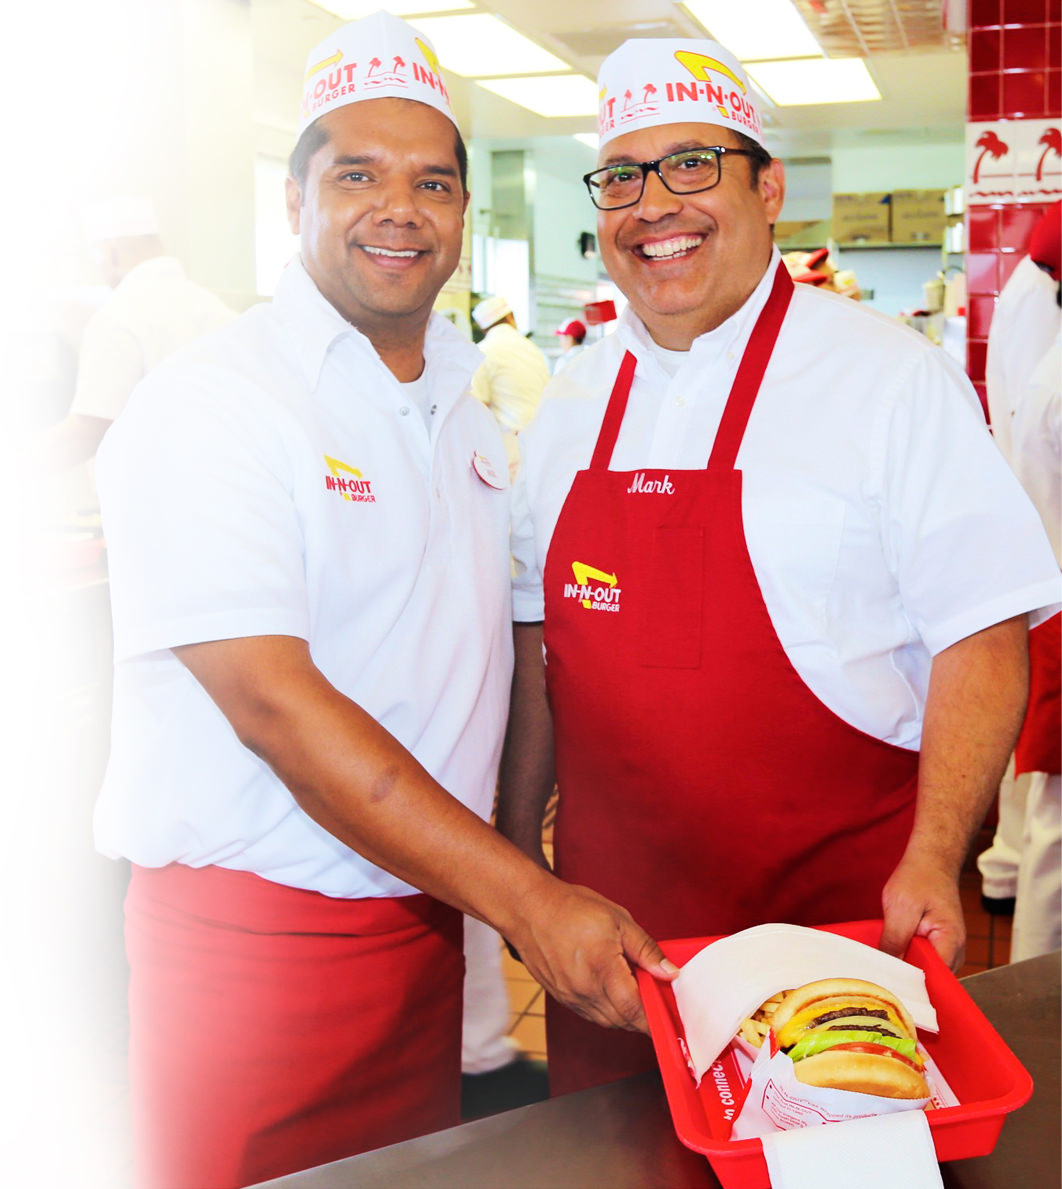 In-N-Out Burger Dress Code